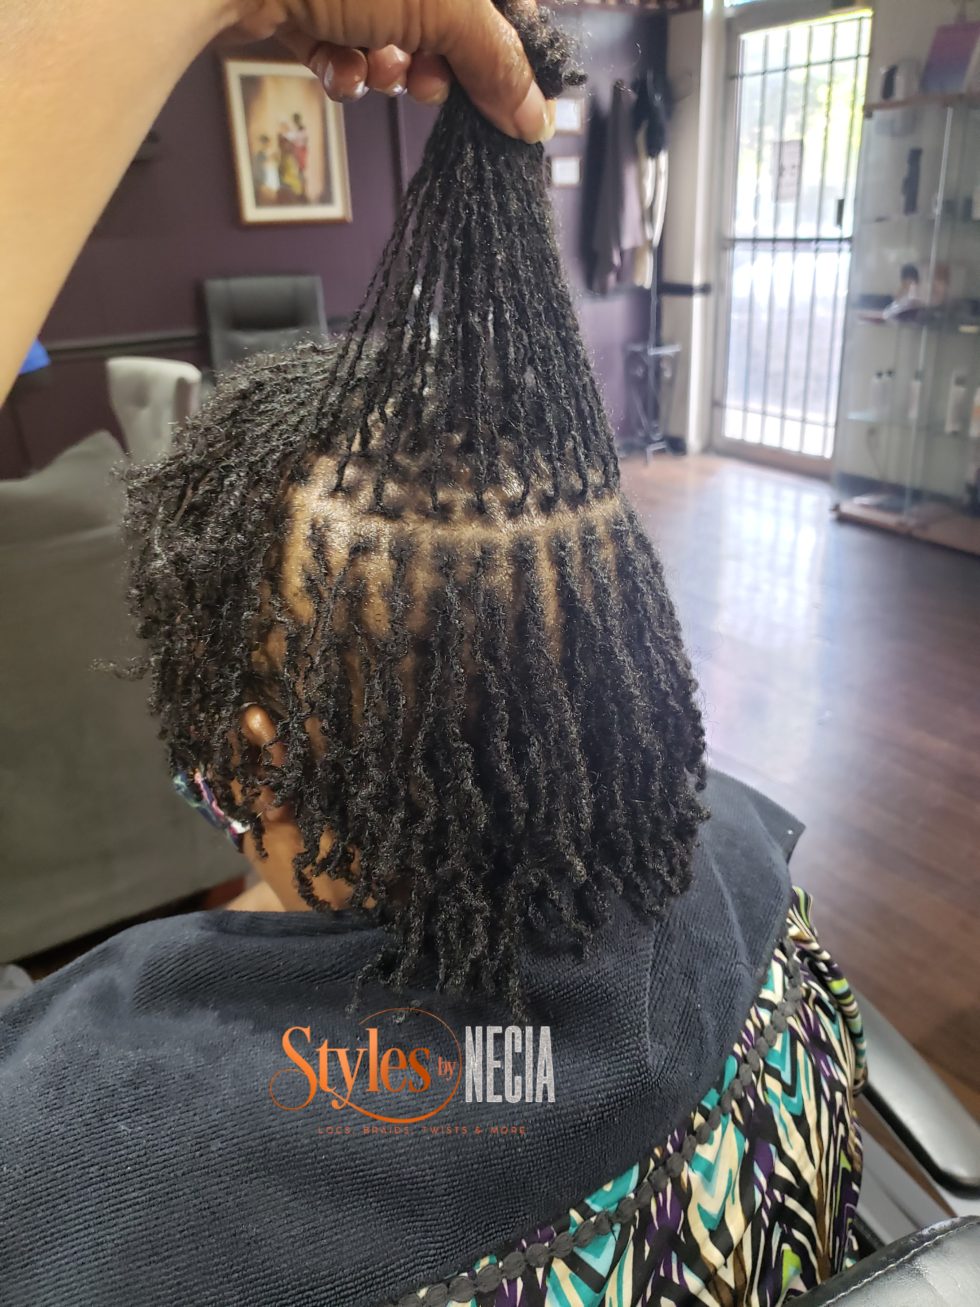 Microlocs | Styles by Necia